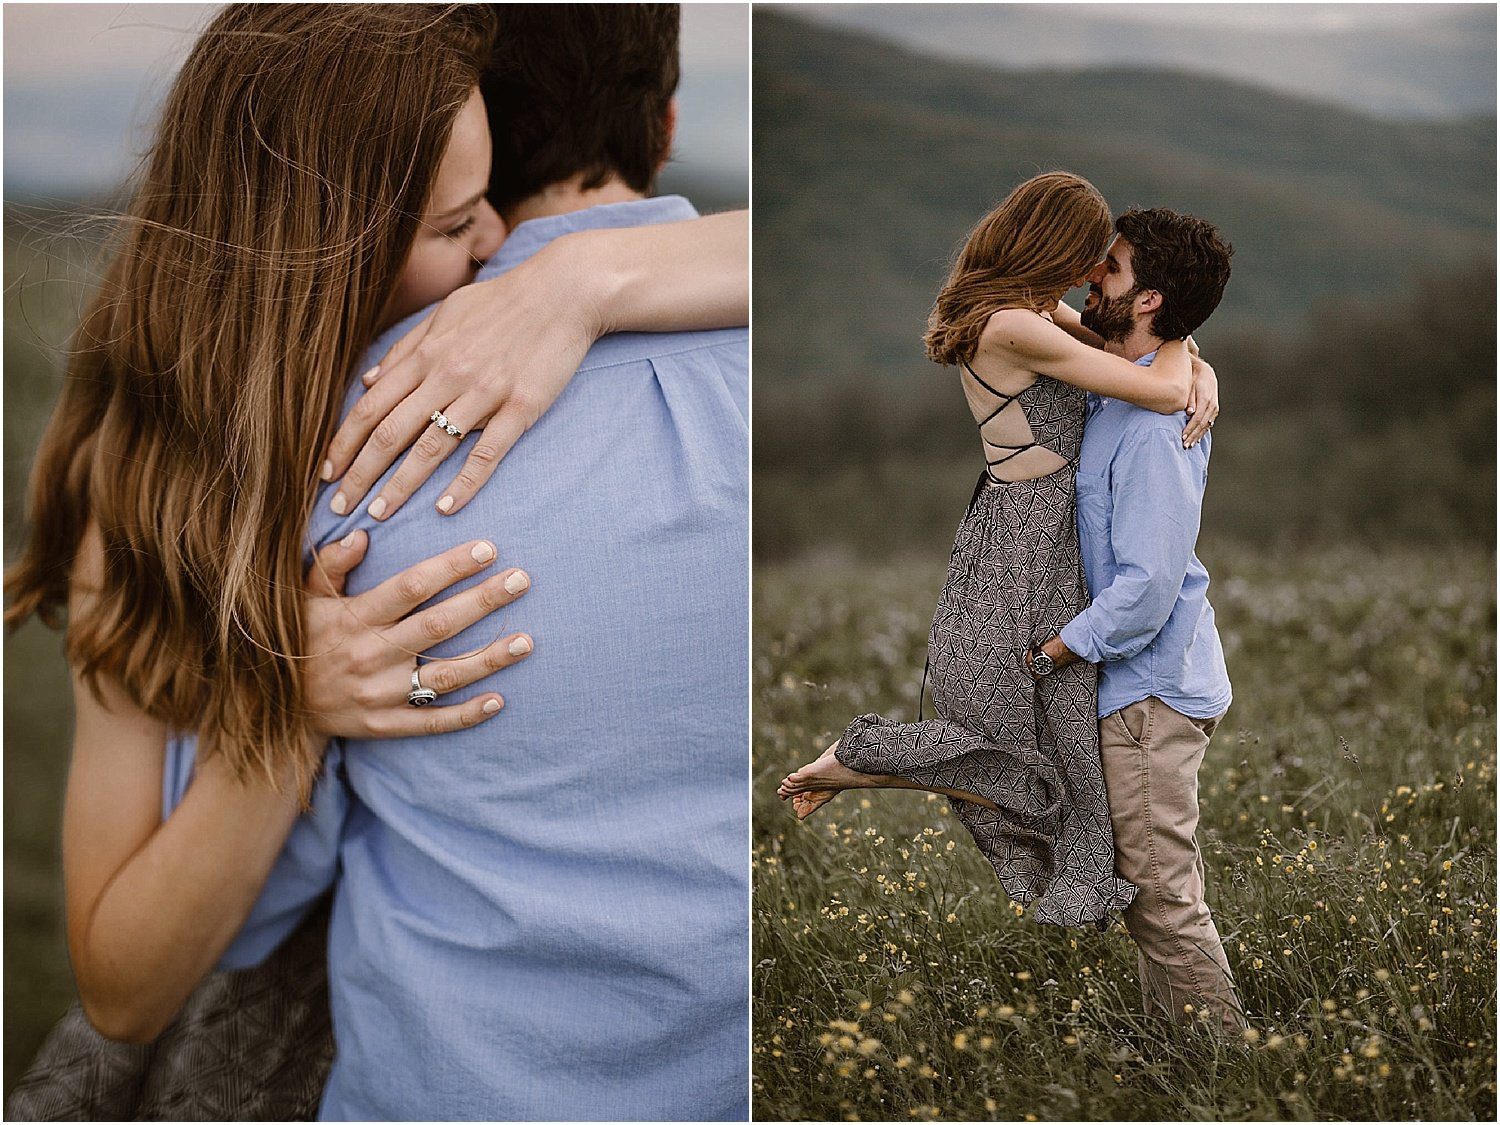 Max Patch Mountain Engagement Photos by Erin Morrison Photography